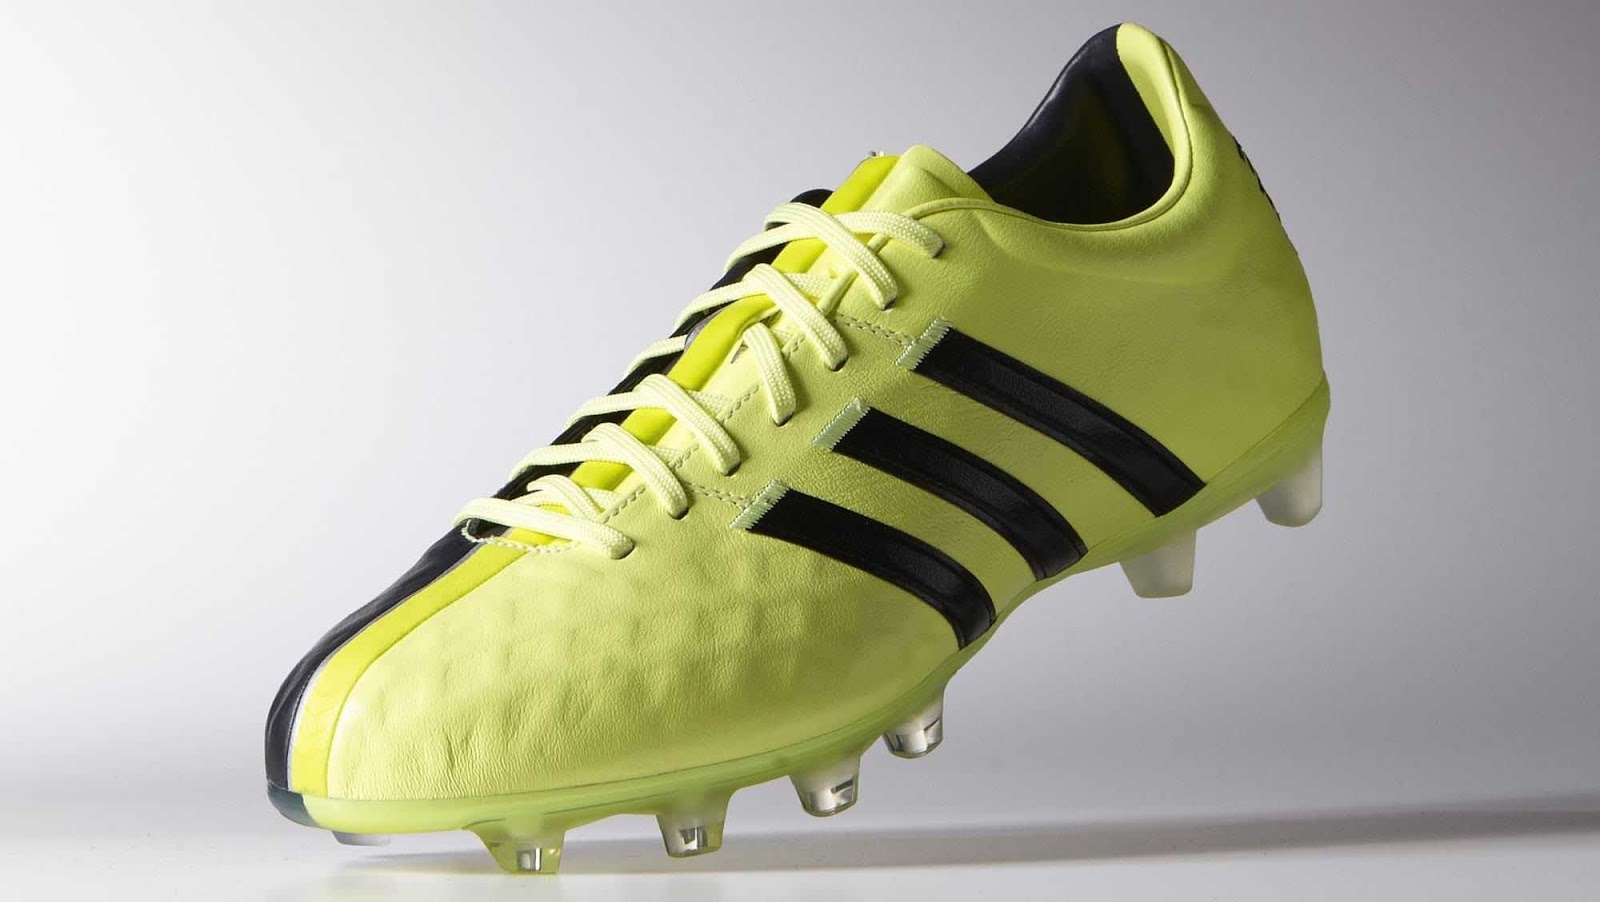 Black / Lime Green Adidas Adipure 11pro 2015 Boots Released - Footy